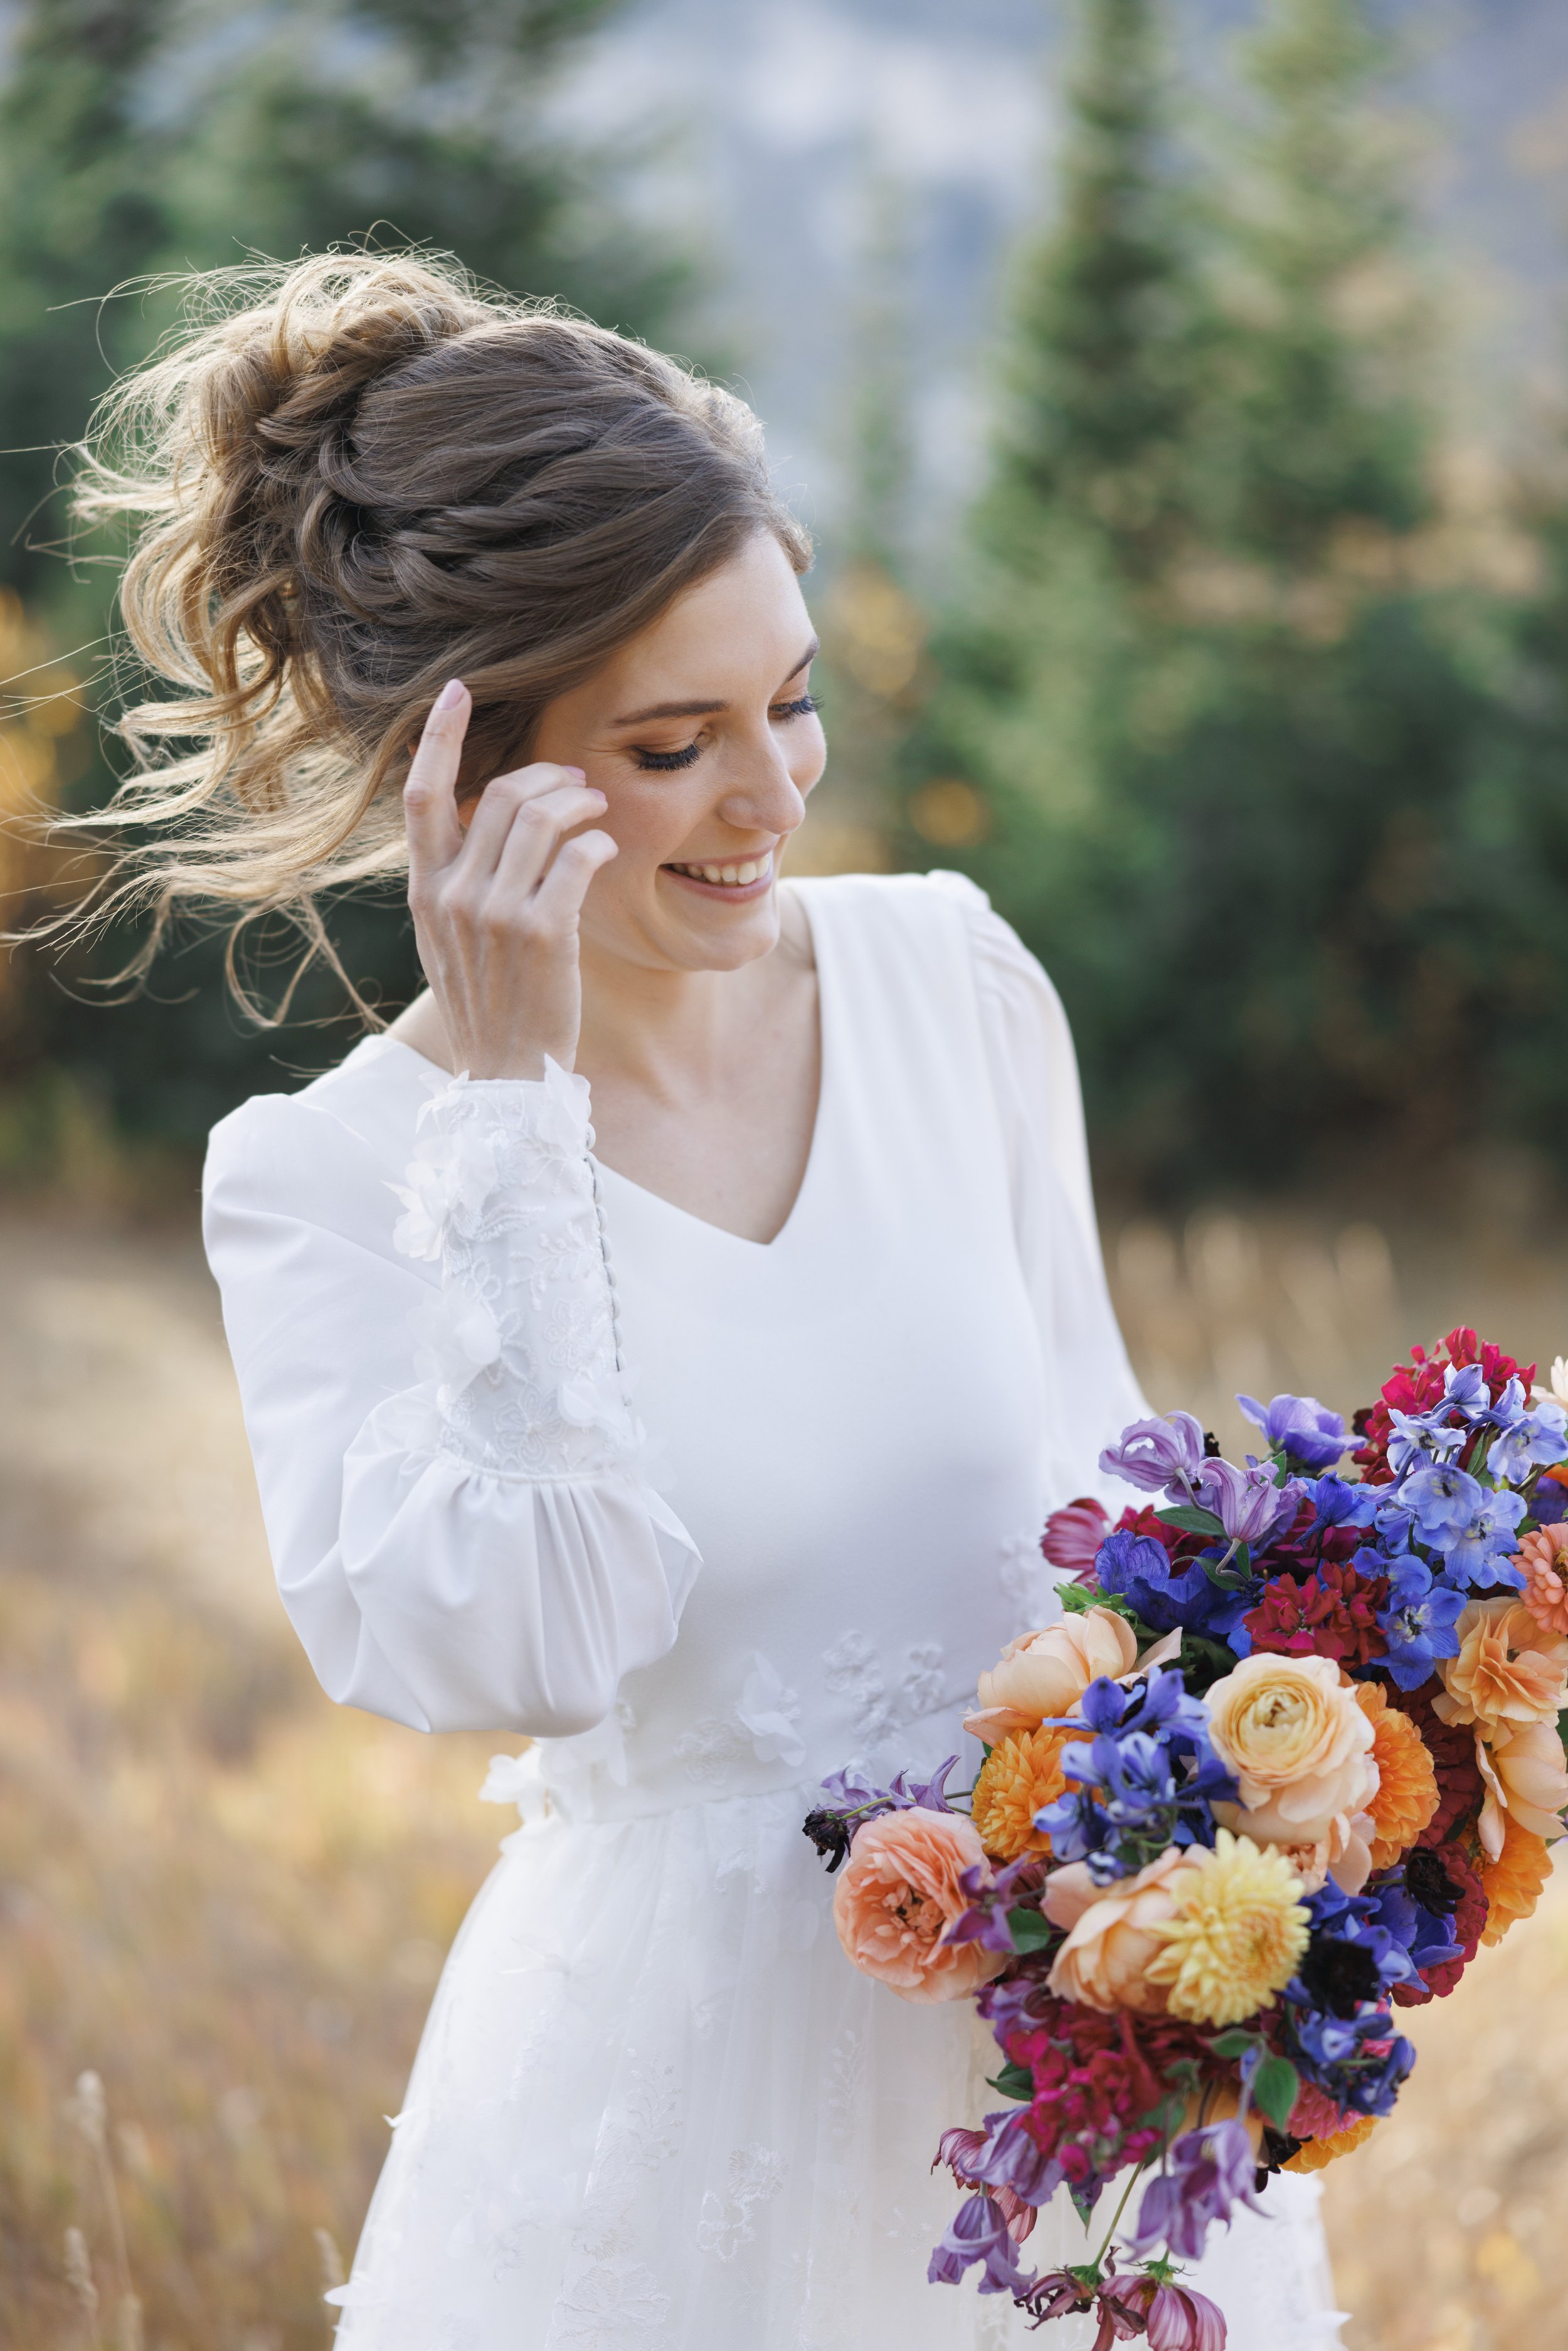  A bride smiles with her fall bouquet in the cottonwood Canyon by Savanna Richardson Photography. bridal candid portraits #SavannaRichardsonPhotography #SavannaRichardsonFormals #CottonwoodCanyon #WeddingFormals #SLCWedding #fallwed 